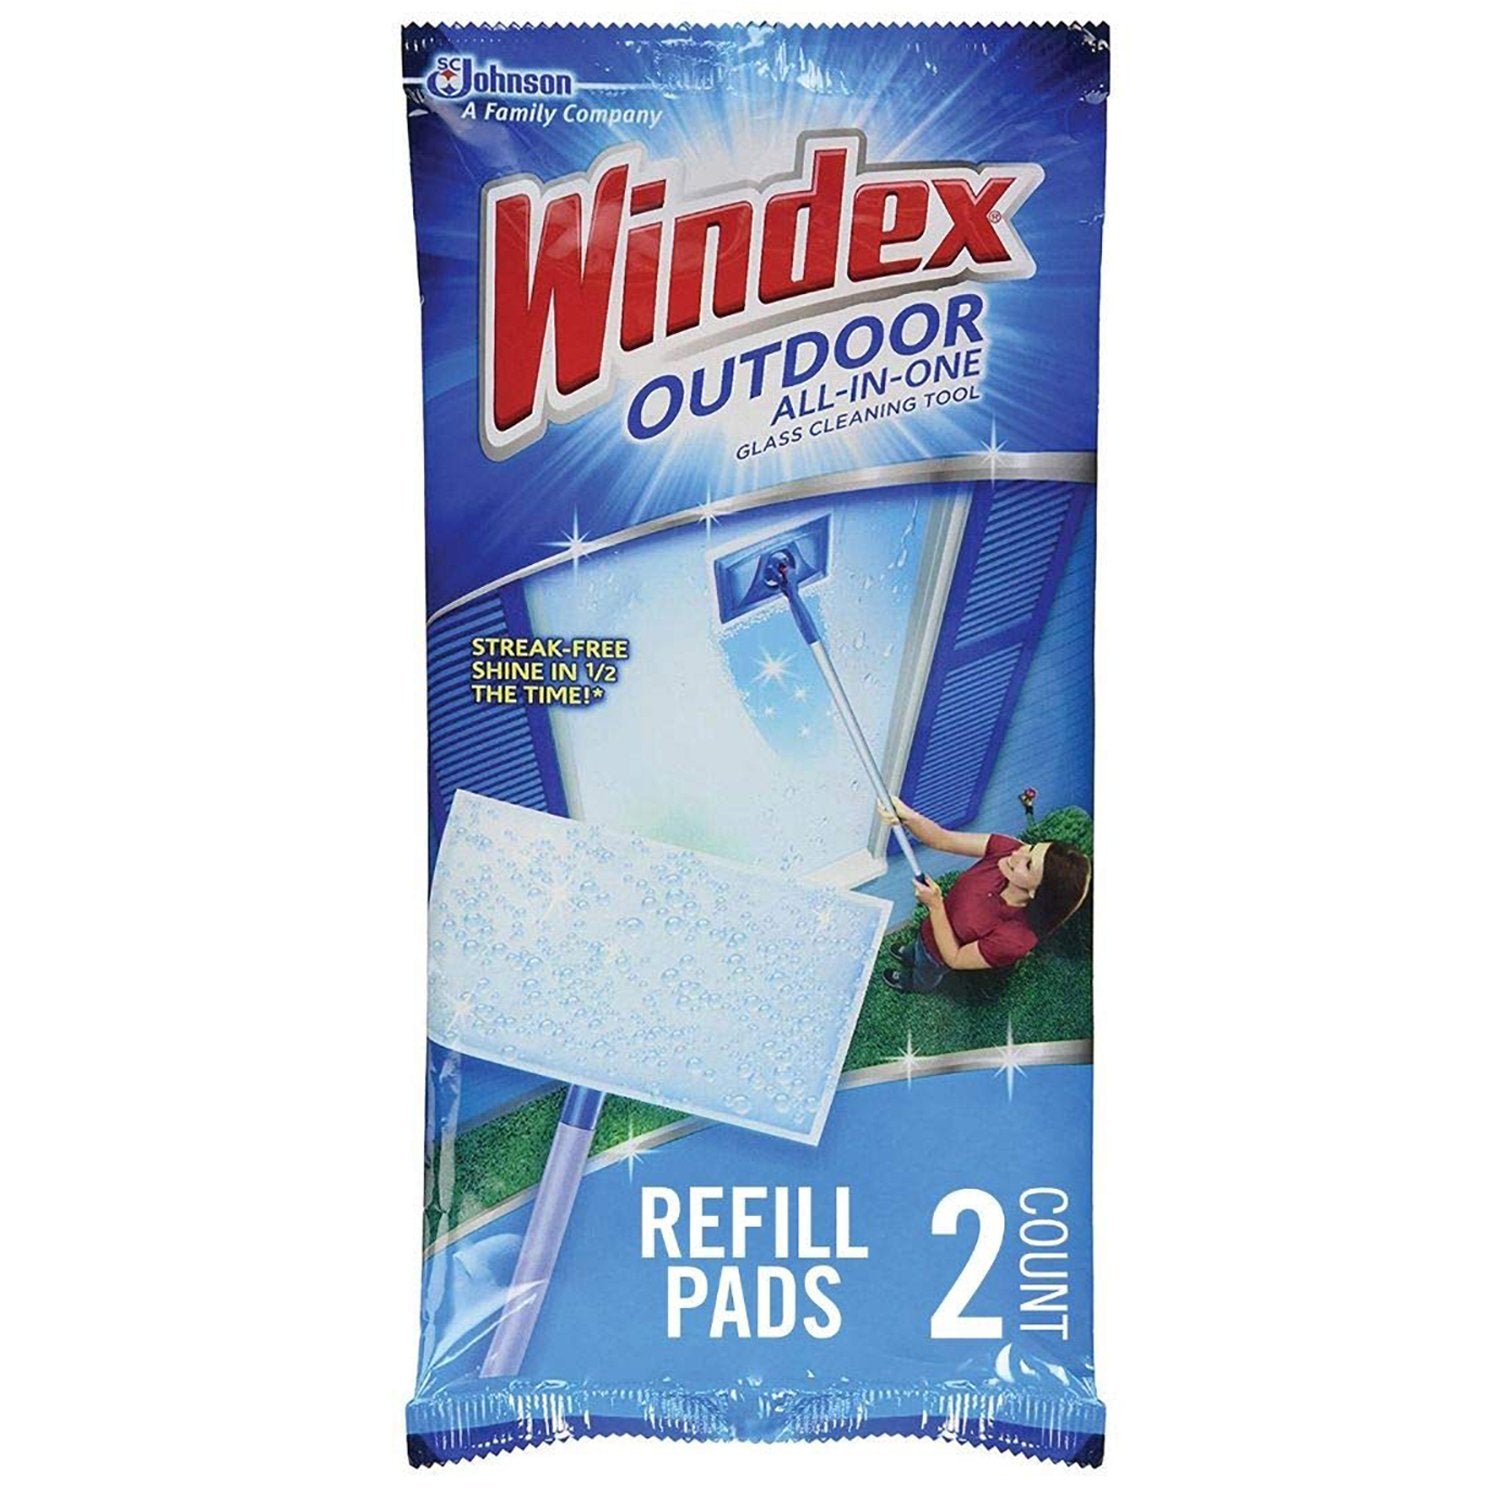 Windex Outdoor All-In-One Glass Cleaning Tool Pads Refill 2 Pieces - 2 -  S&Honlinestore